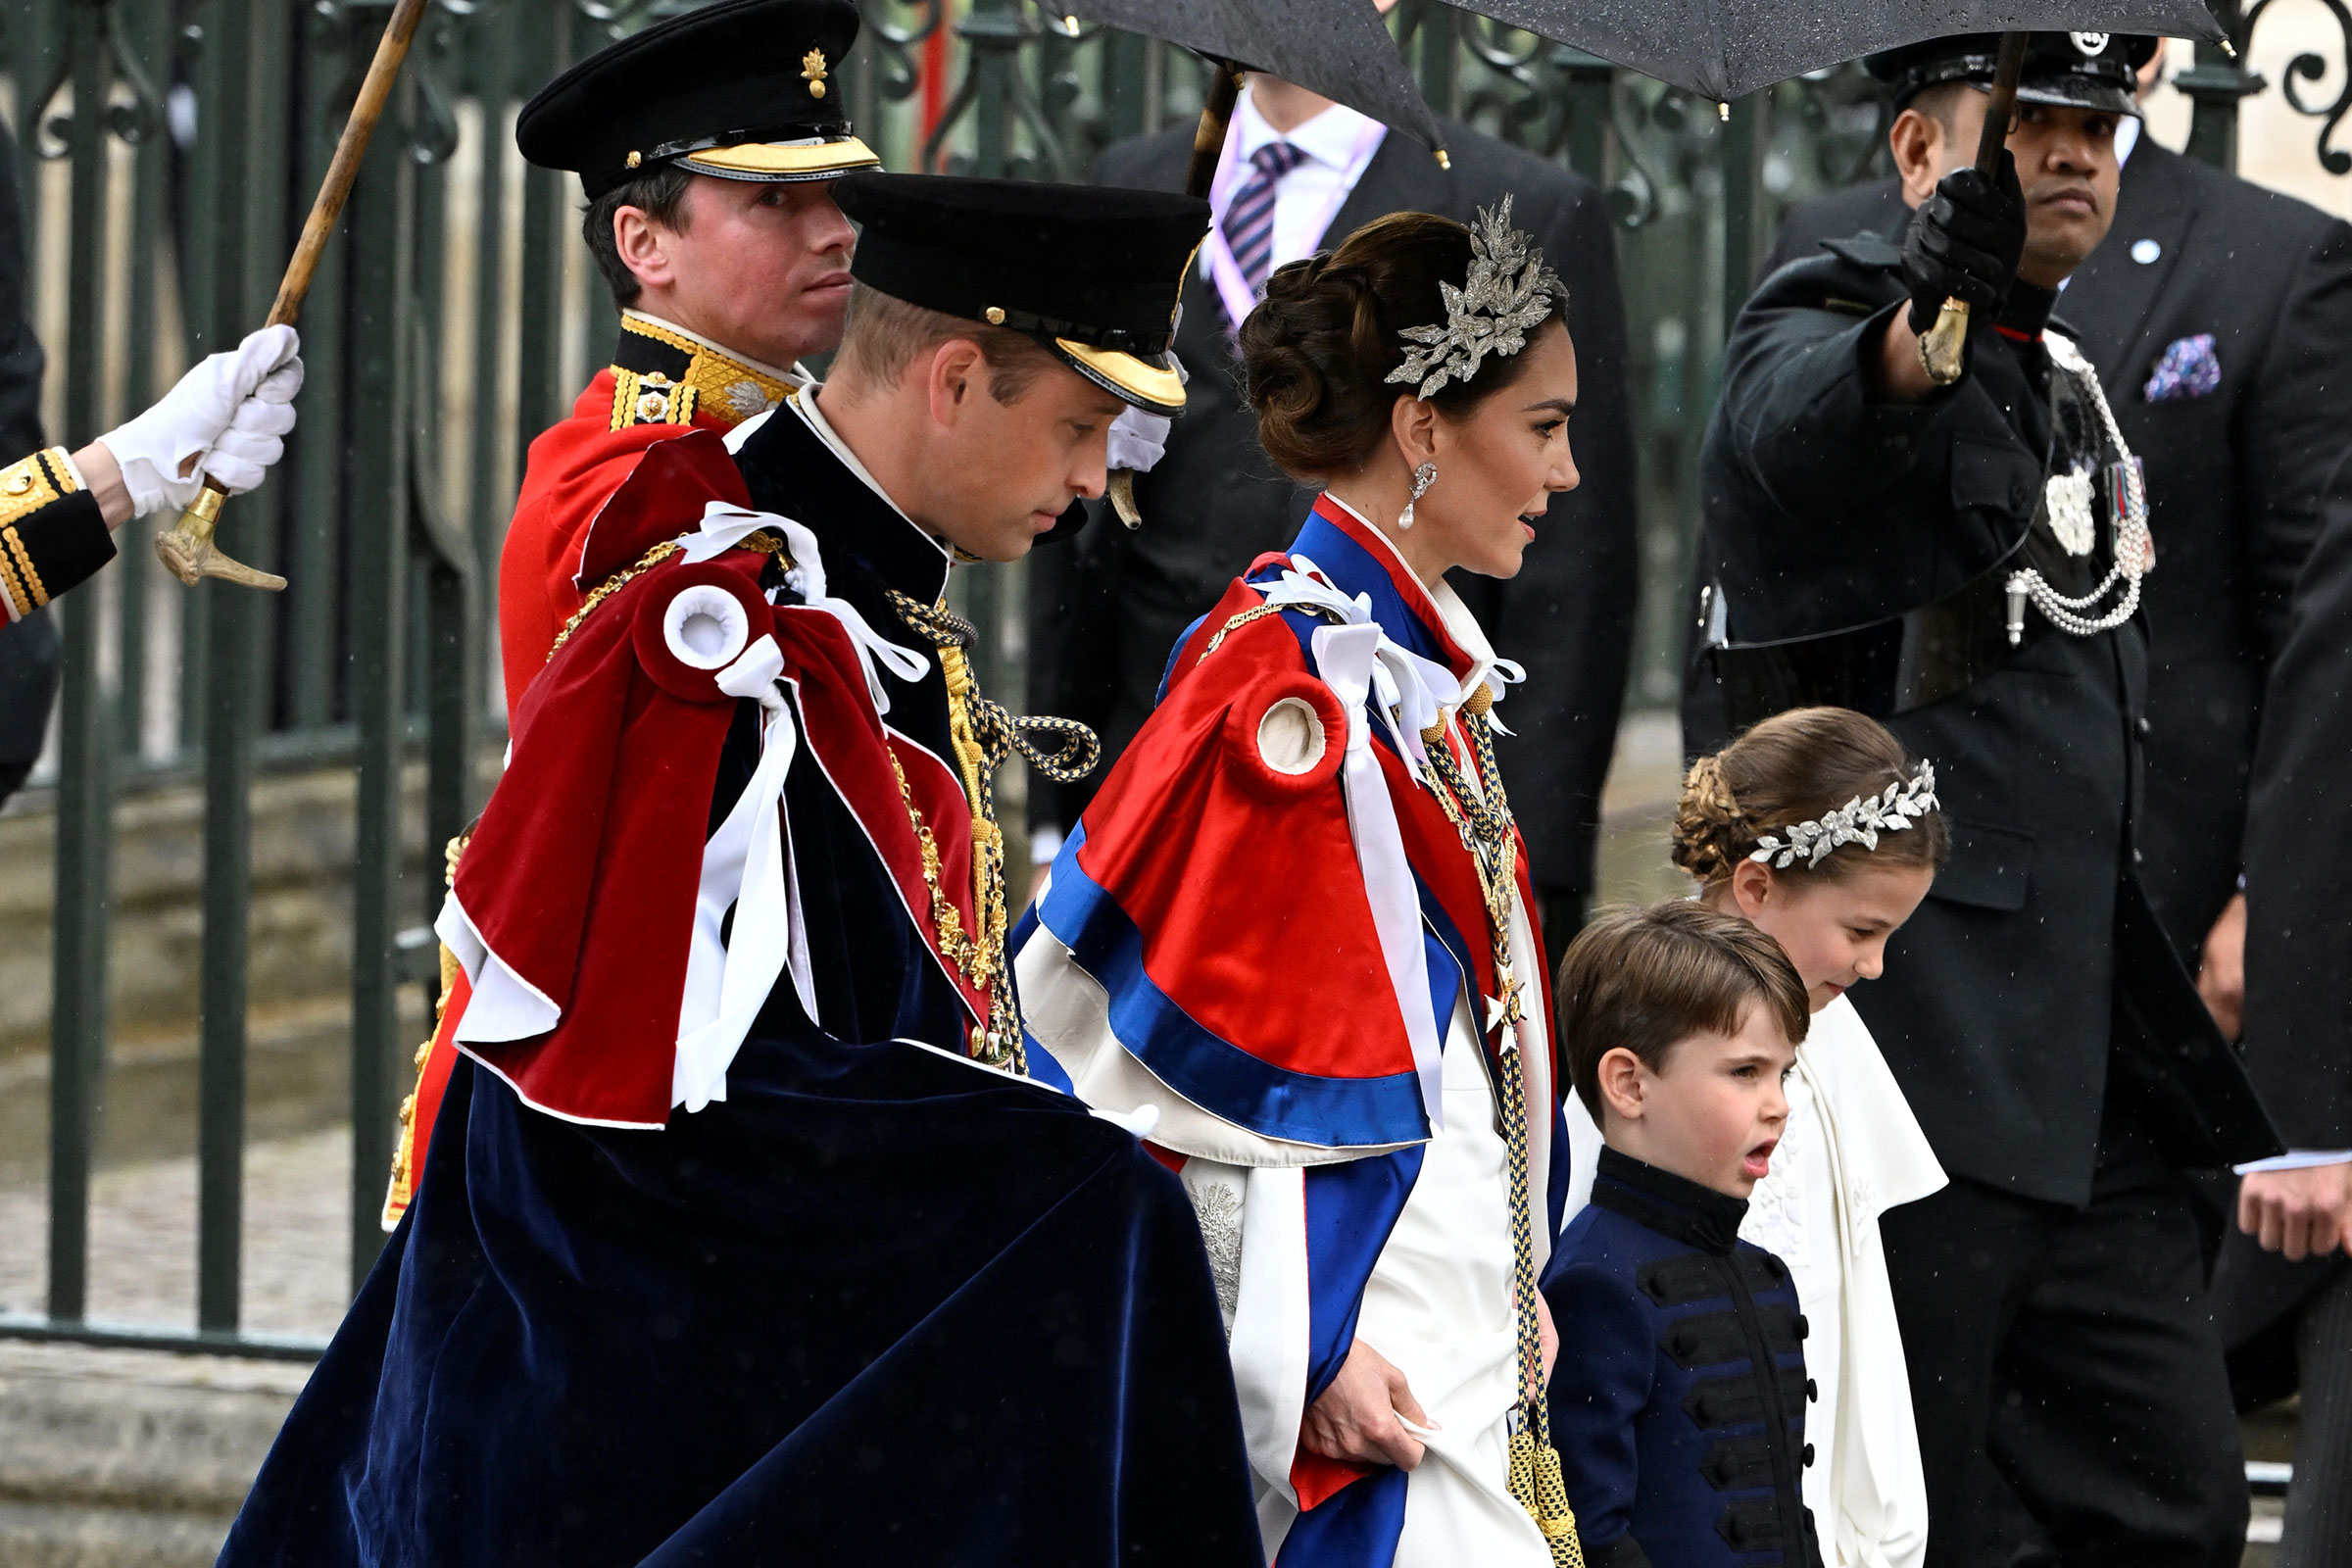 Royals arrive for historic Order of the Garter procession as